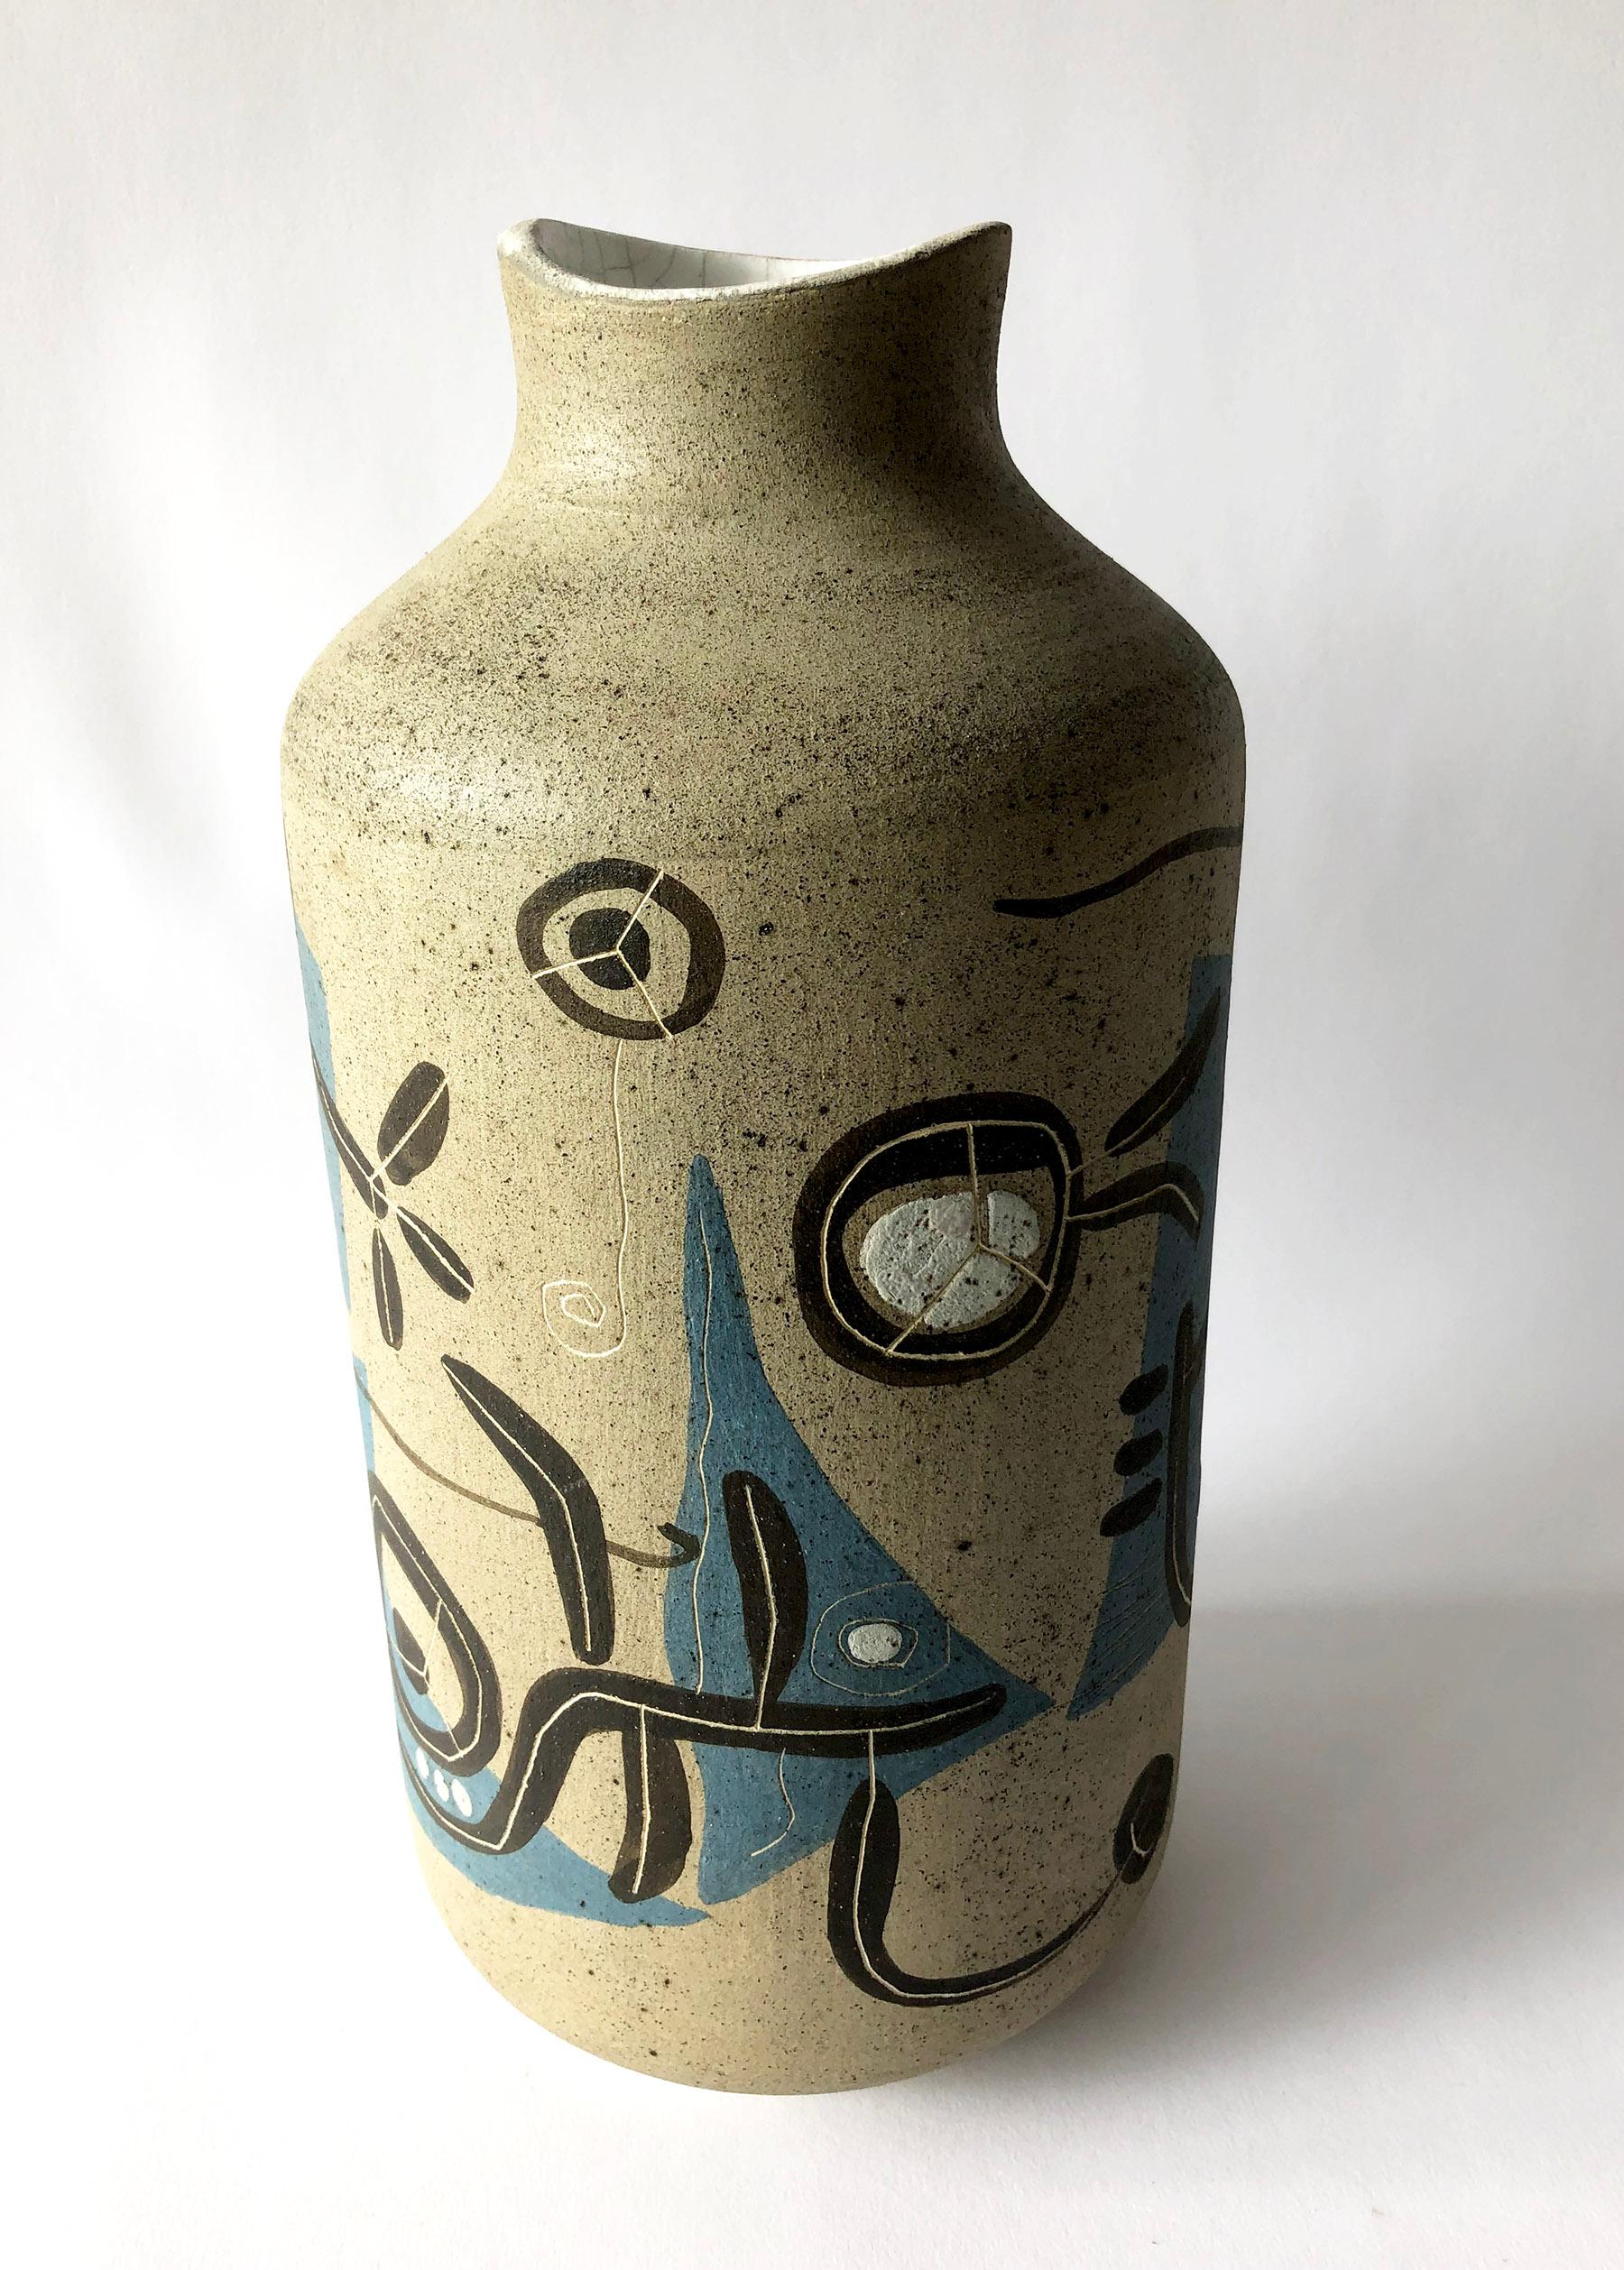 Surrealist ceramic vase made by artist Arganat, possibly Spanish in origin. Vase has a hand painted and incised dream-like design created by the artist, much like the work of Miro and Cocteau. Piece measures 13